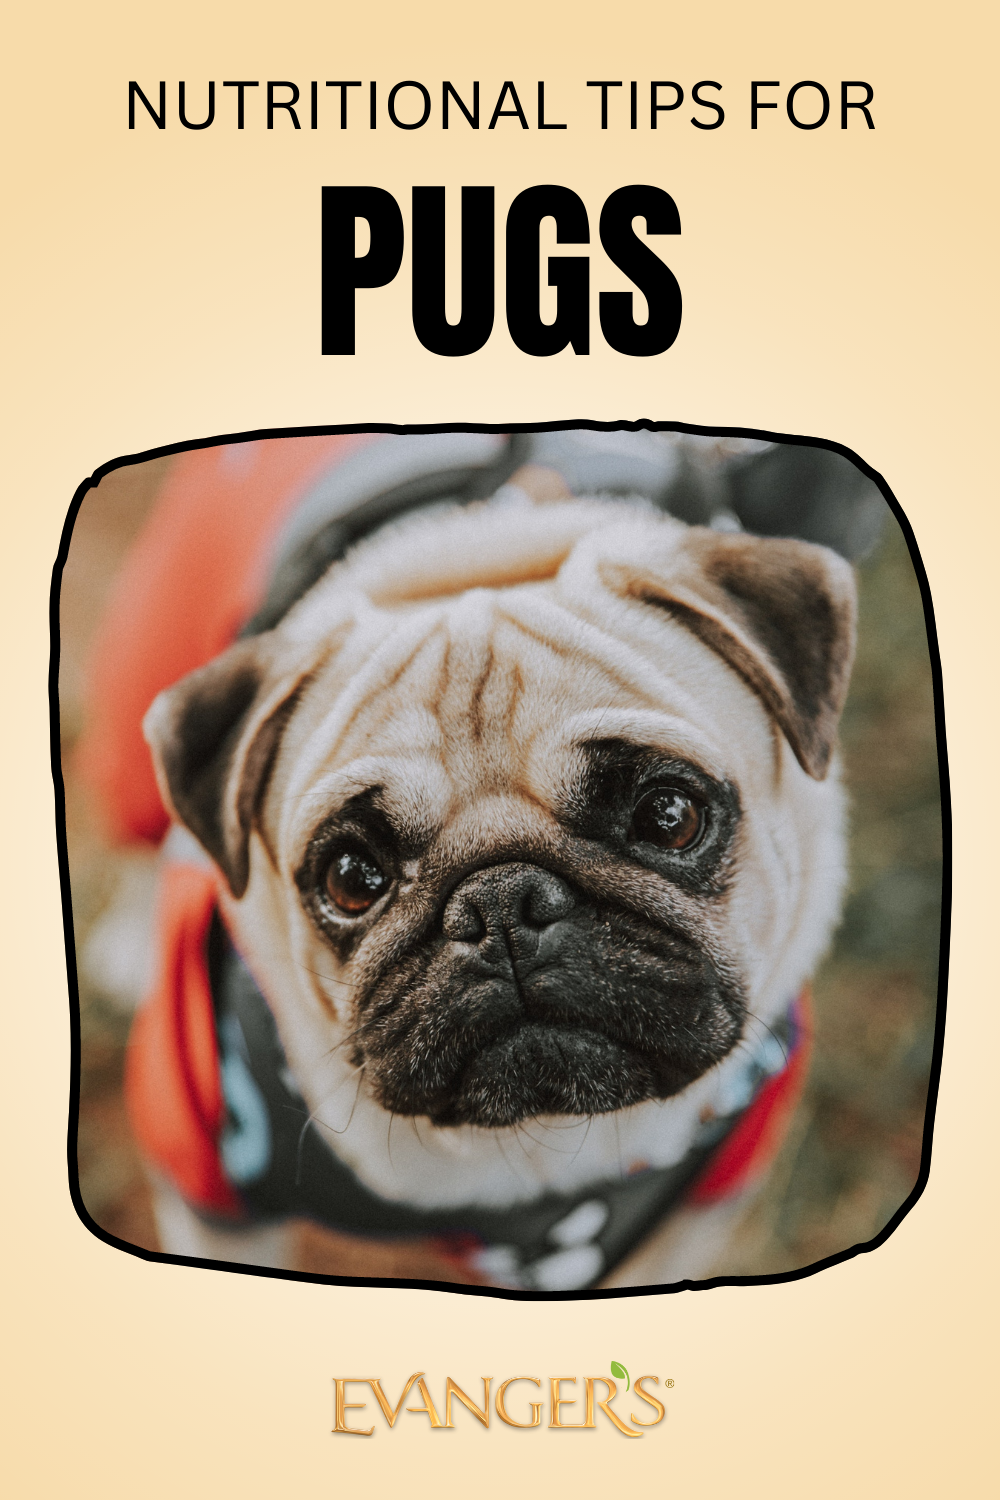 Nutritional Tips for Pugs